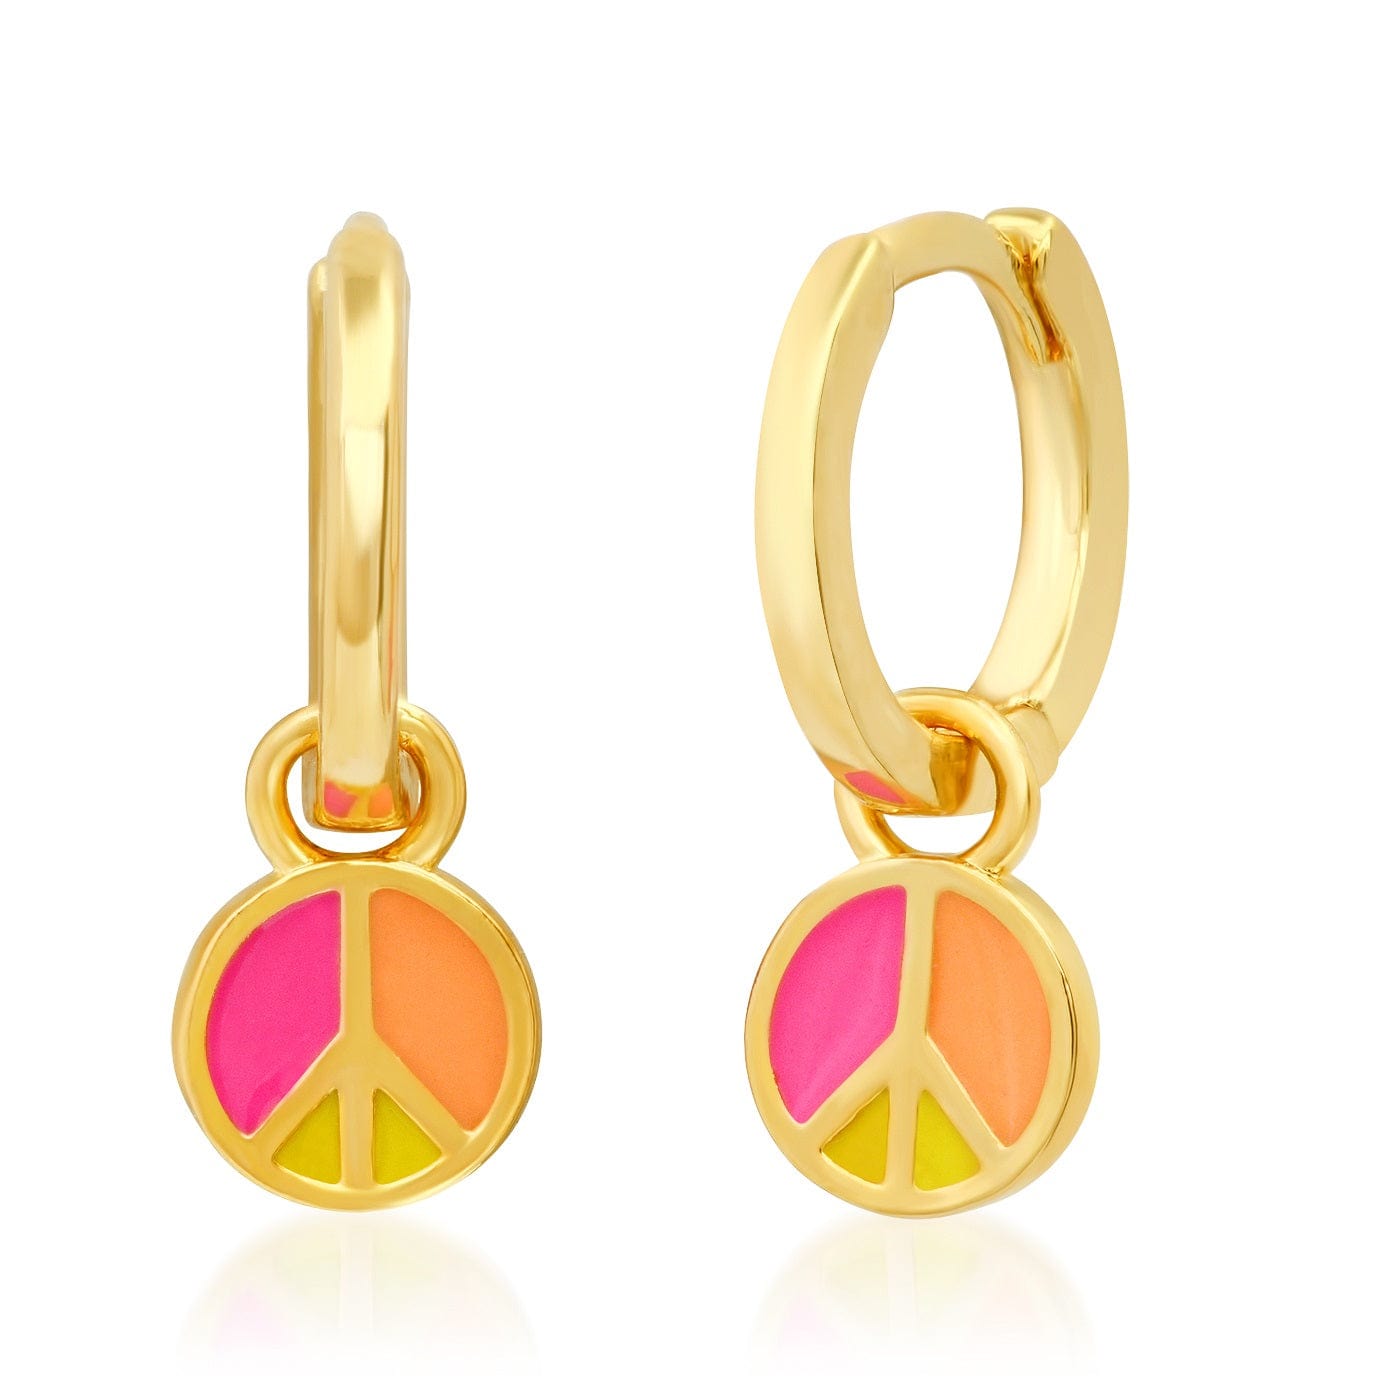 TAI JEWELRY Earrings Pink Mix Huggie with Enamel Peace Sign Charm